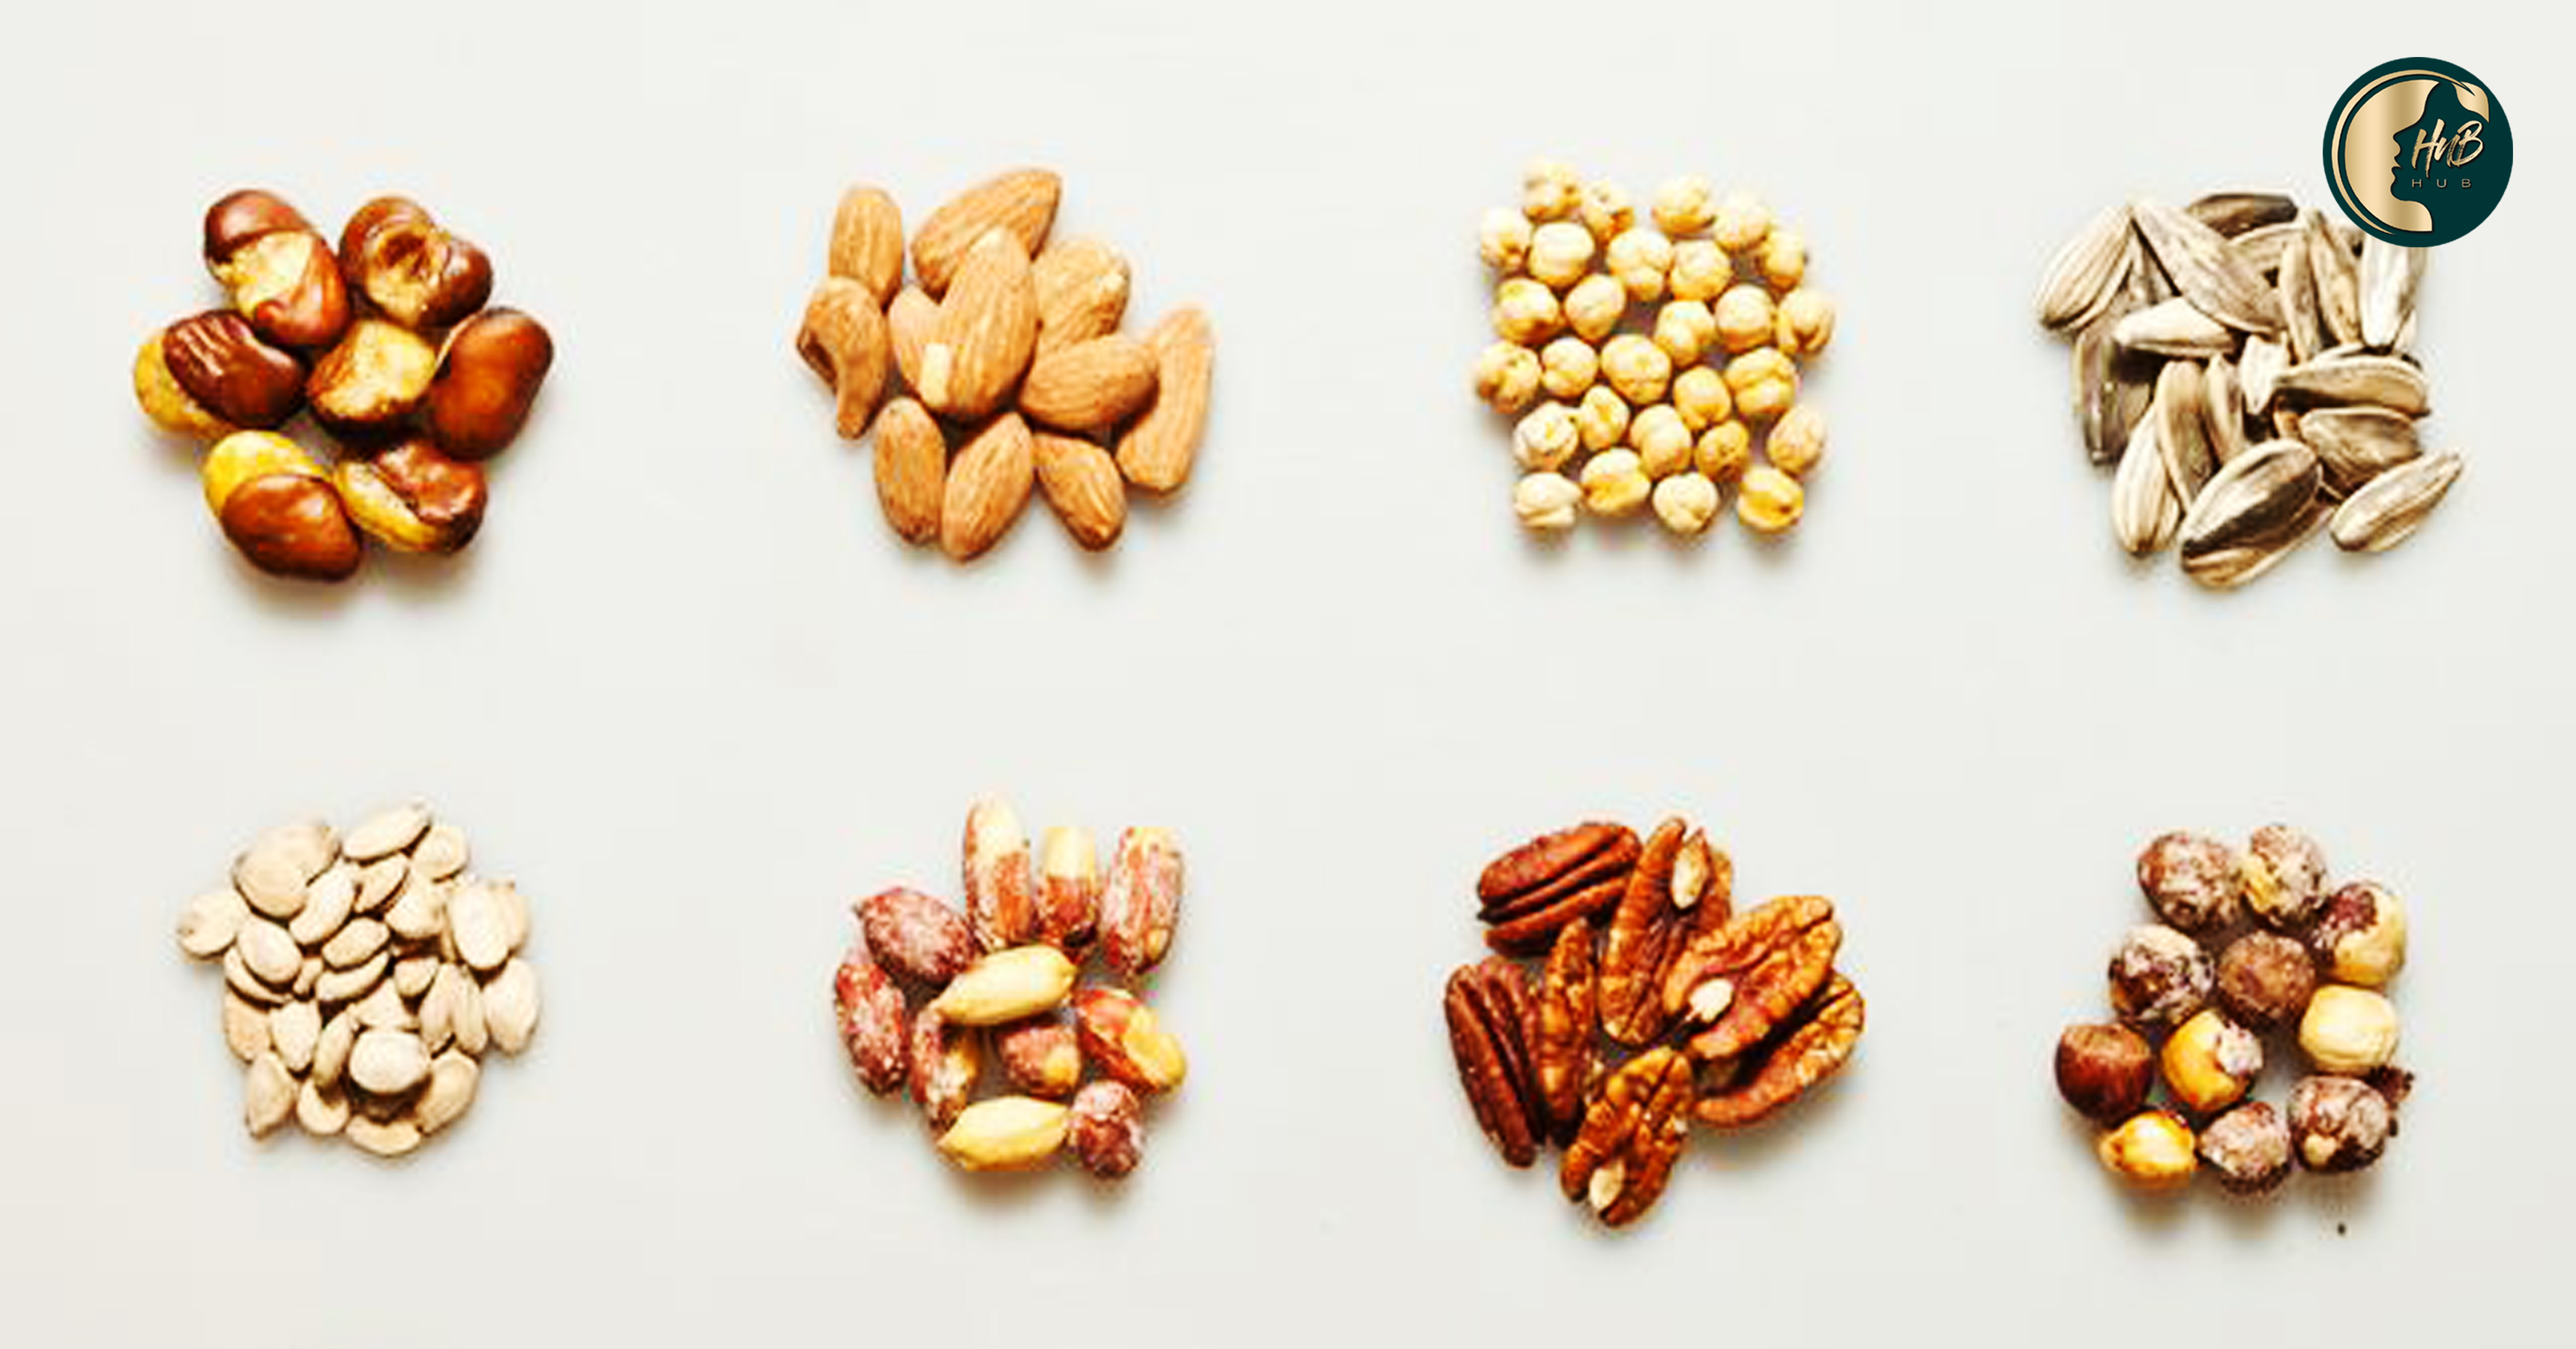 Nuts and Seeds for new Growing and Strong Hair! Health n Beauty HuB